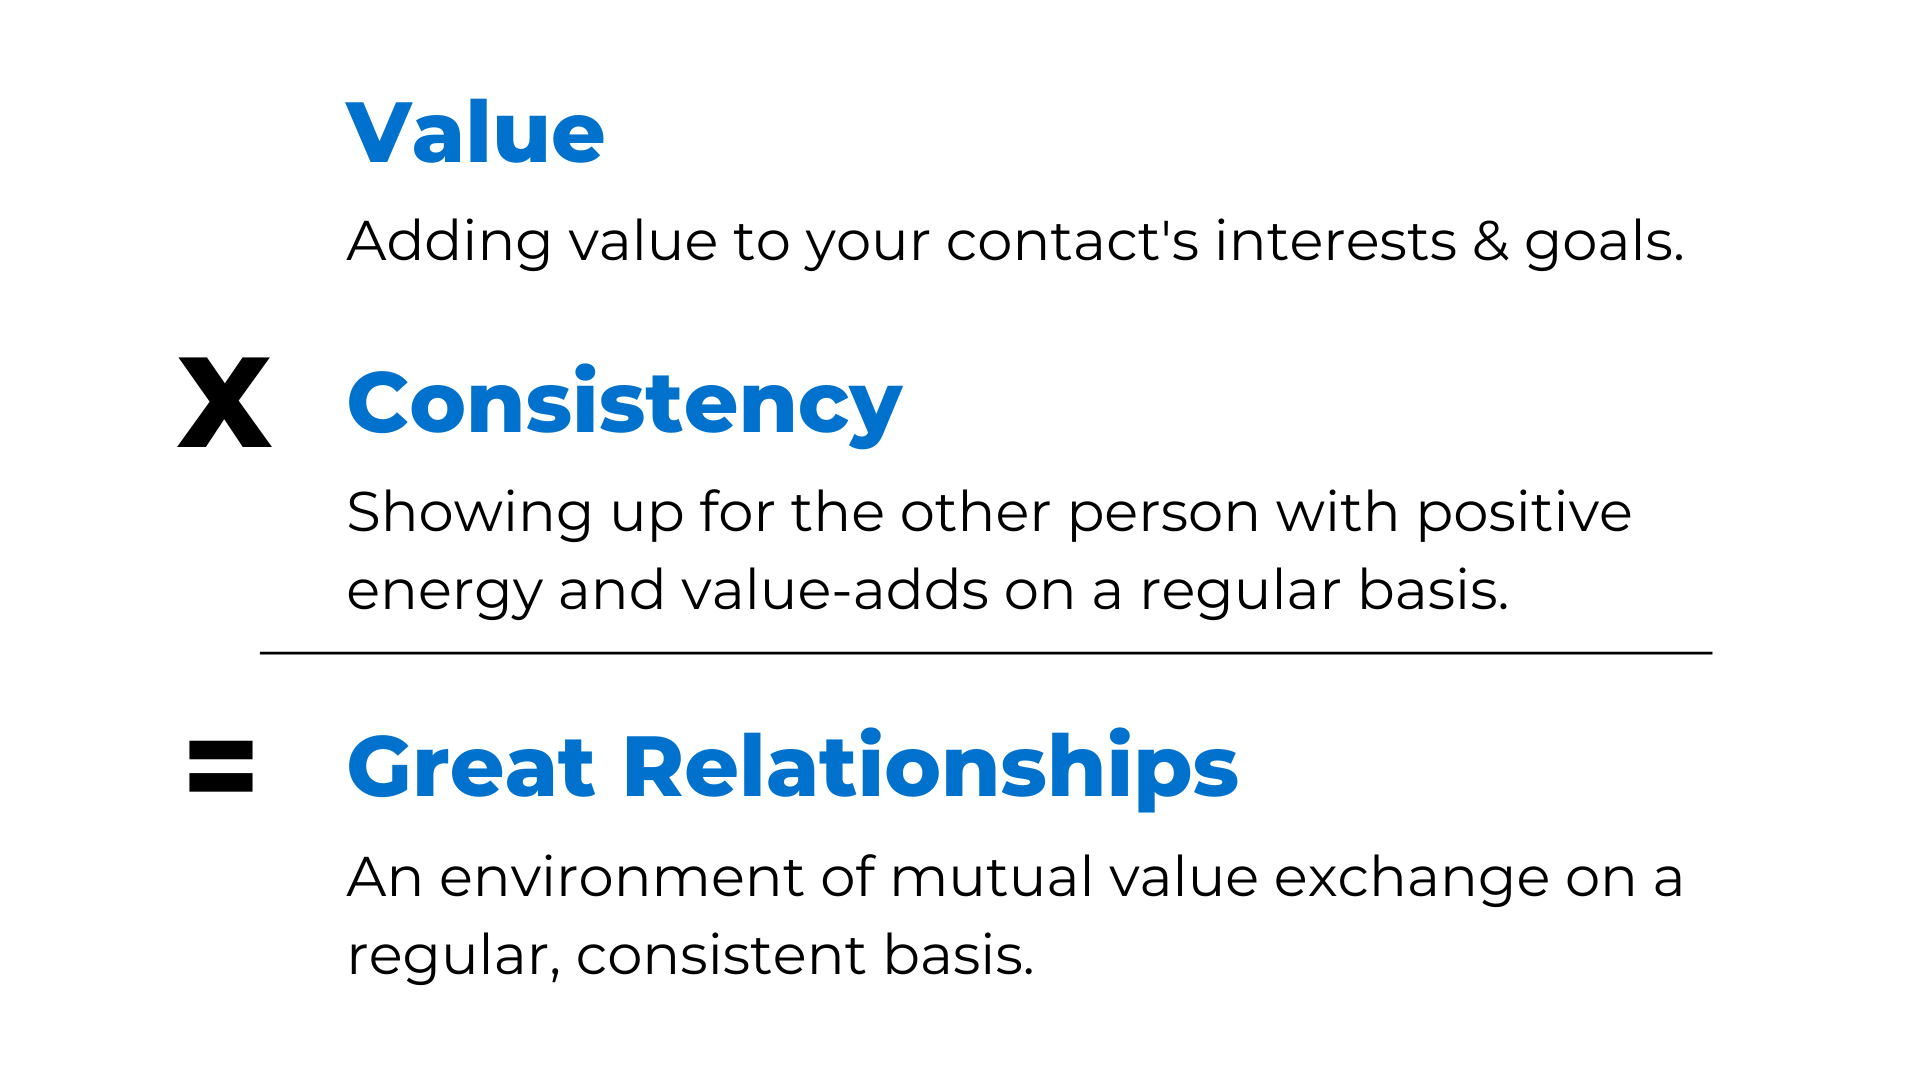 How To Network - The Value Equation